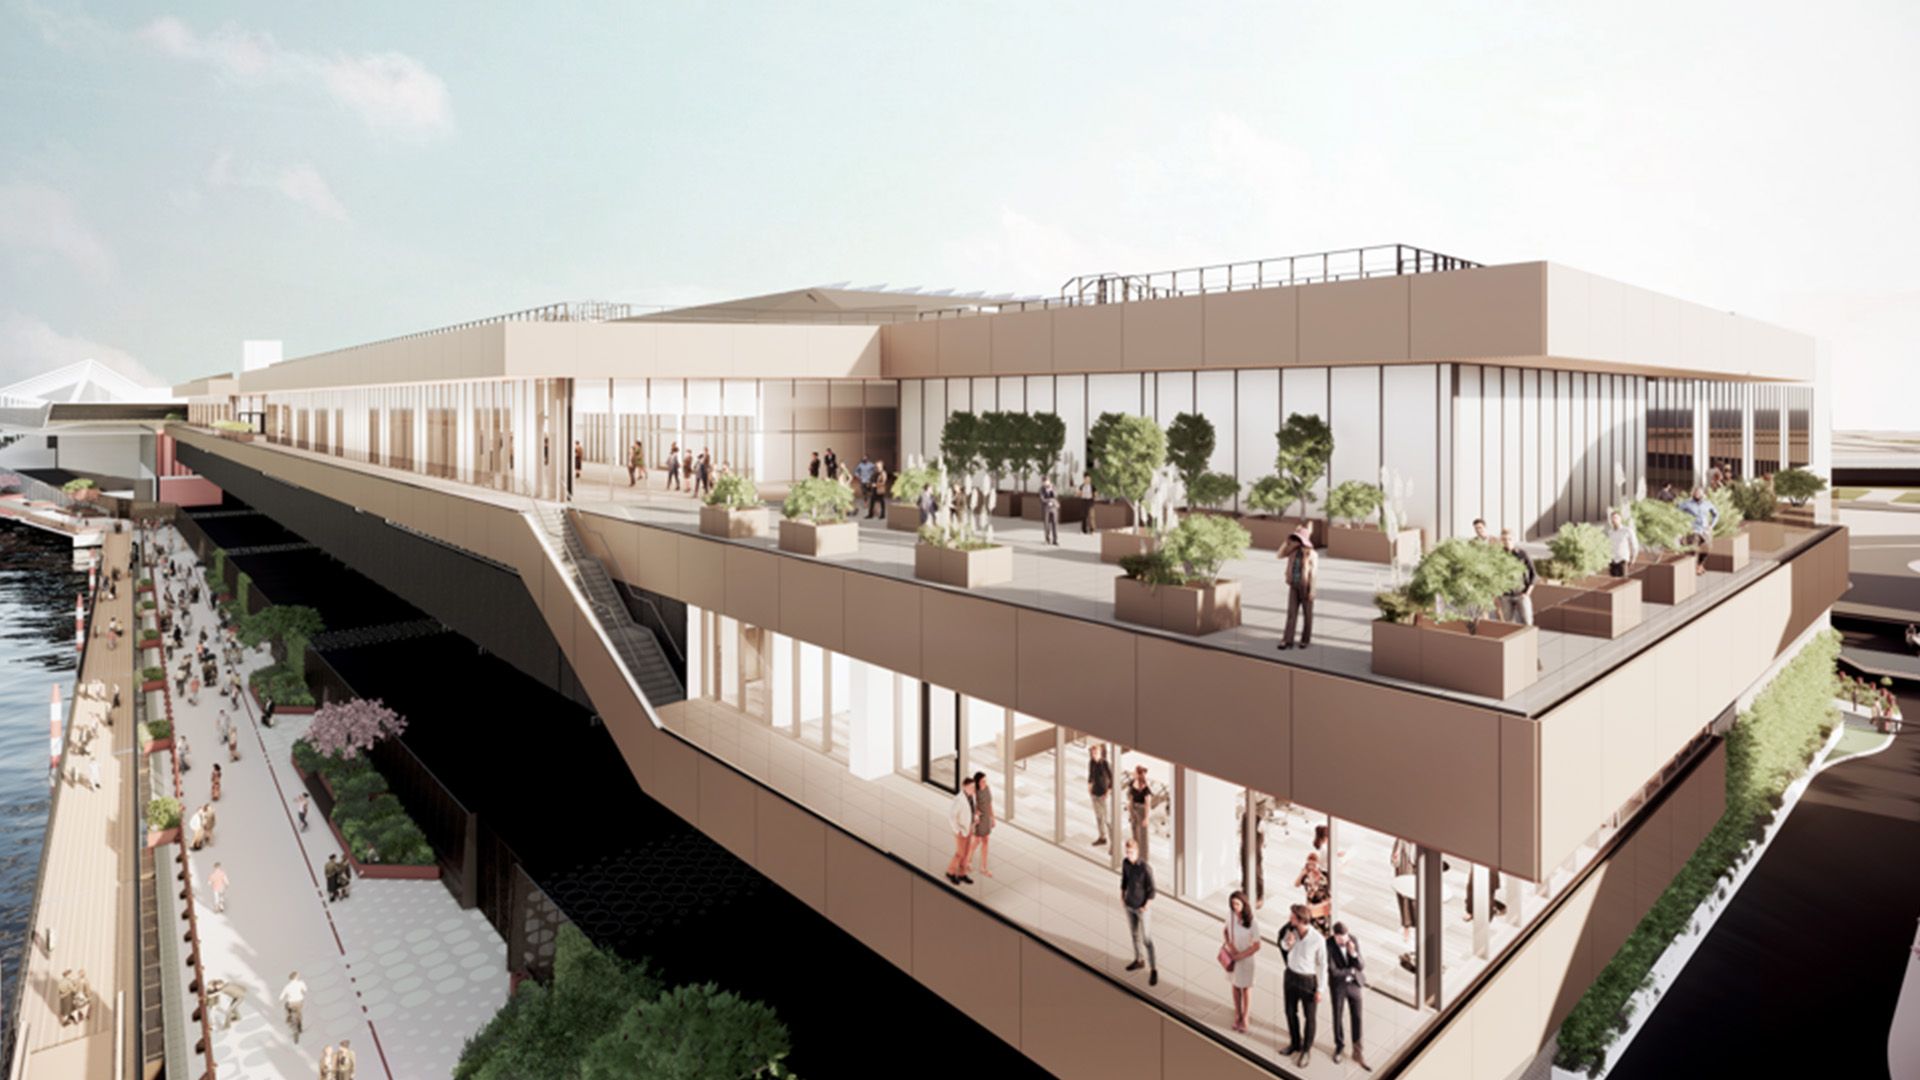 FIRST LOOK: How the new ExCeL London expansion will look